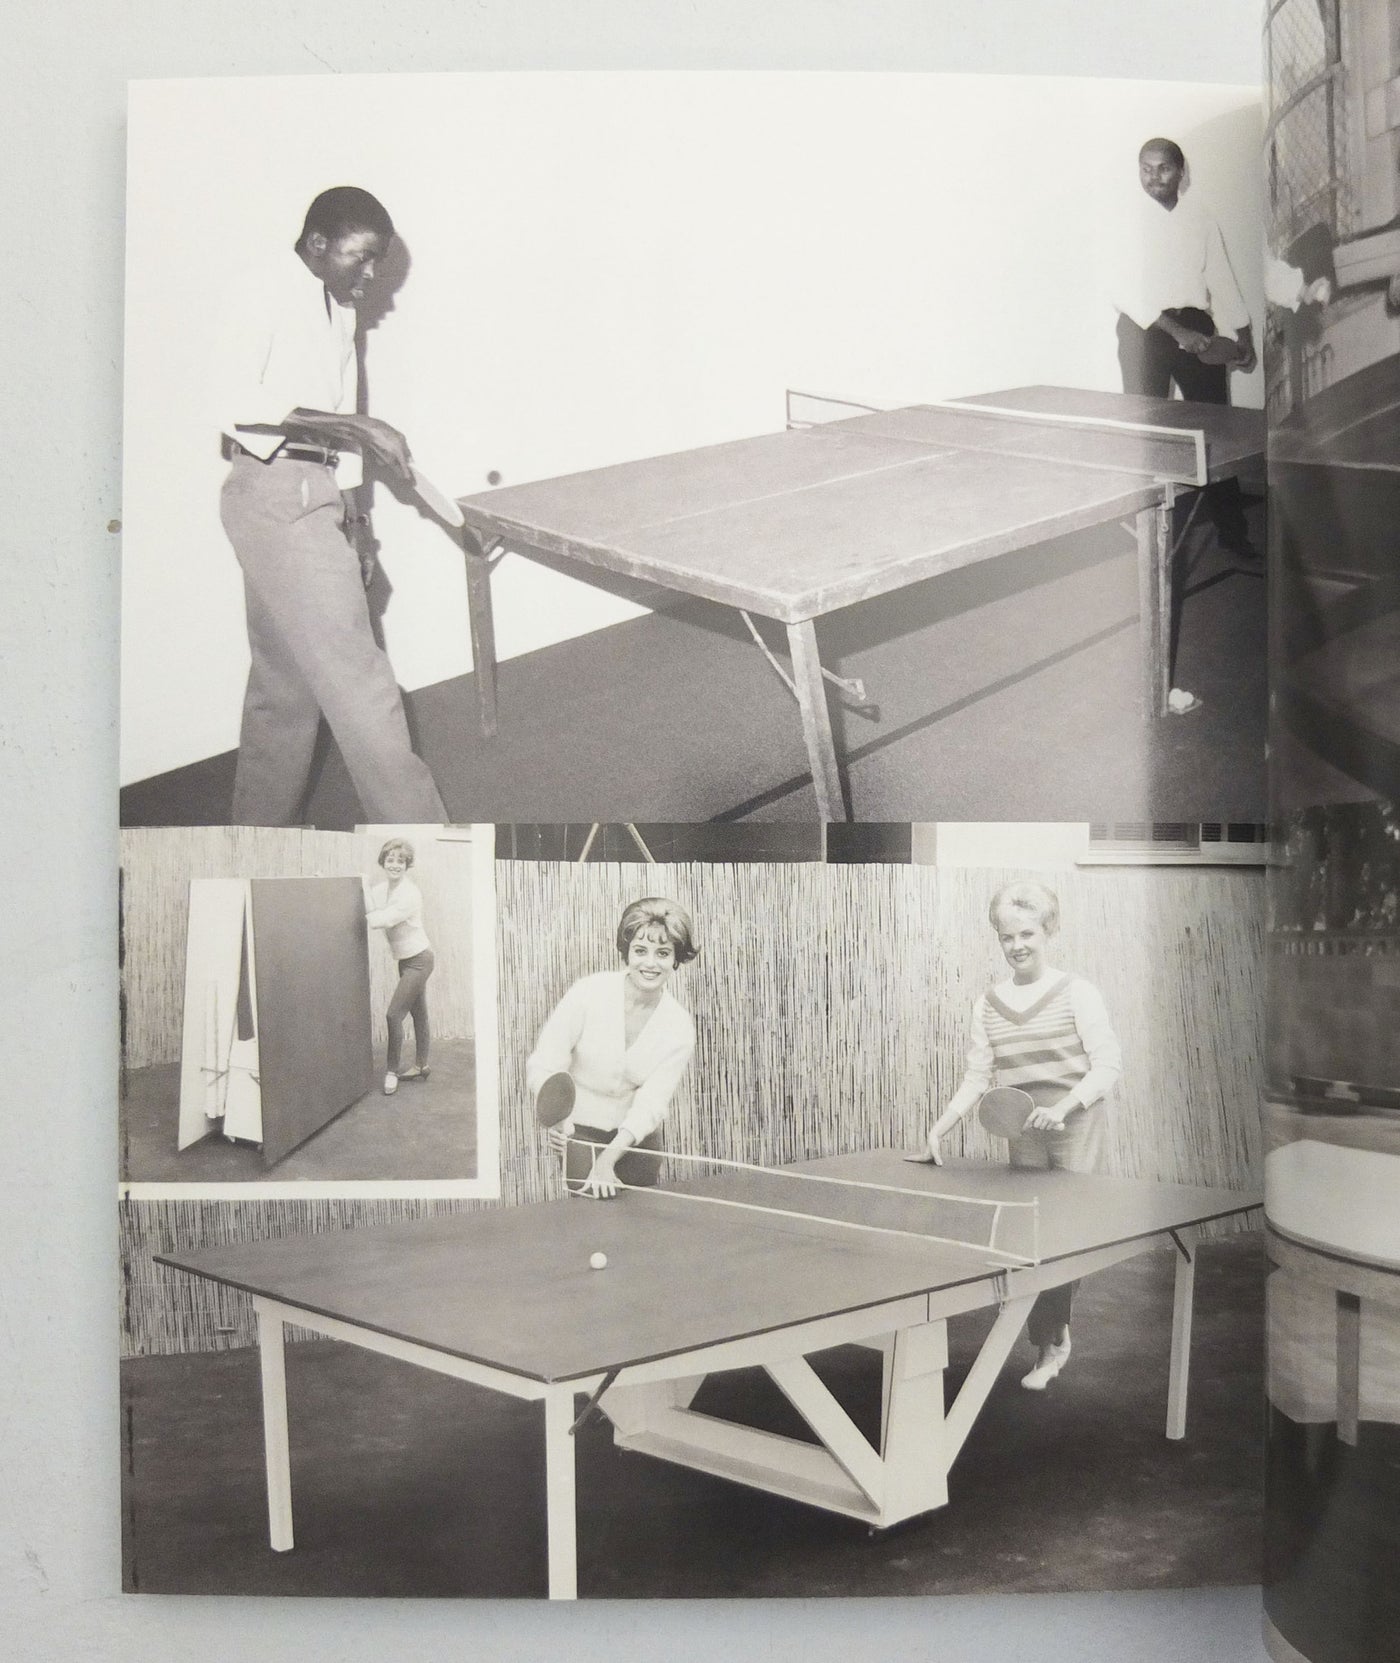 Ping Pong by Geoff Dyer & Pico Lyer}